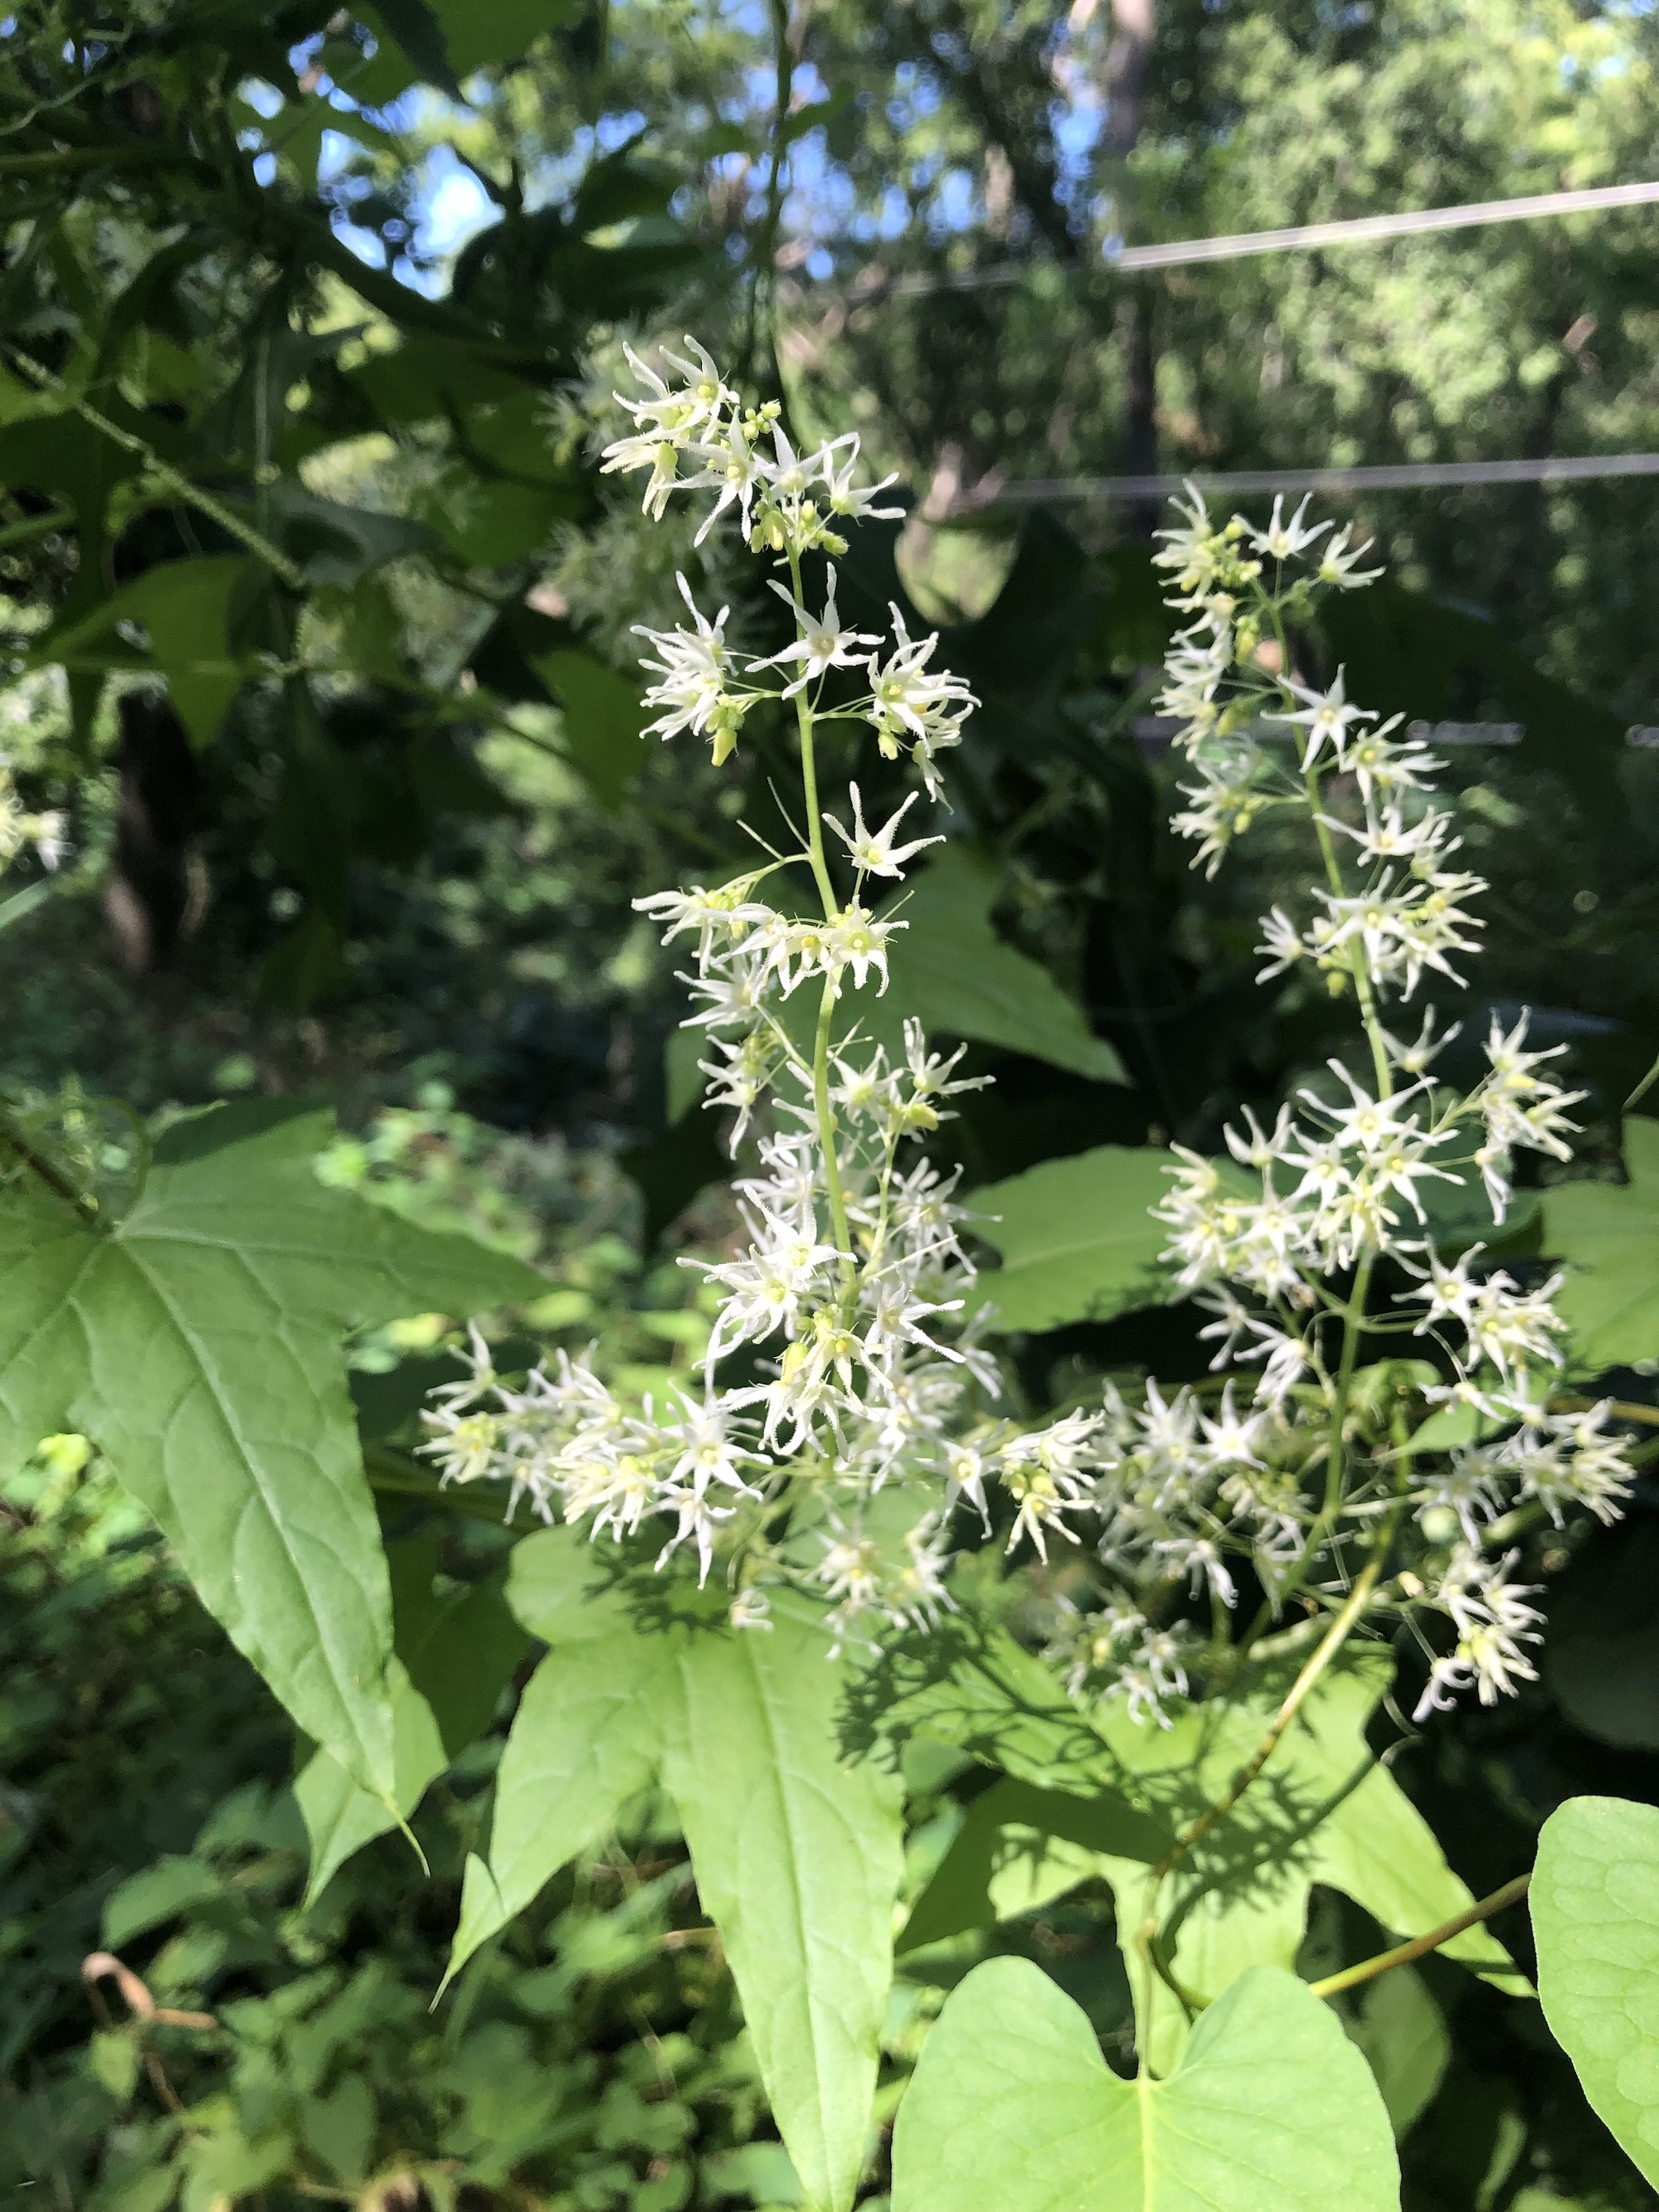 Wild Cucumber off of bike path behind Gregory Street in Madison, Wisconsin on August 13, 2021.